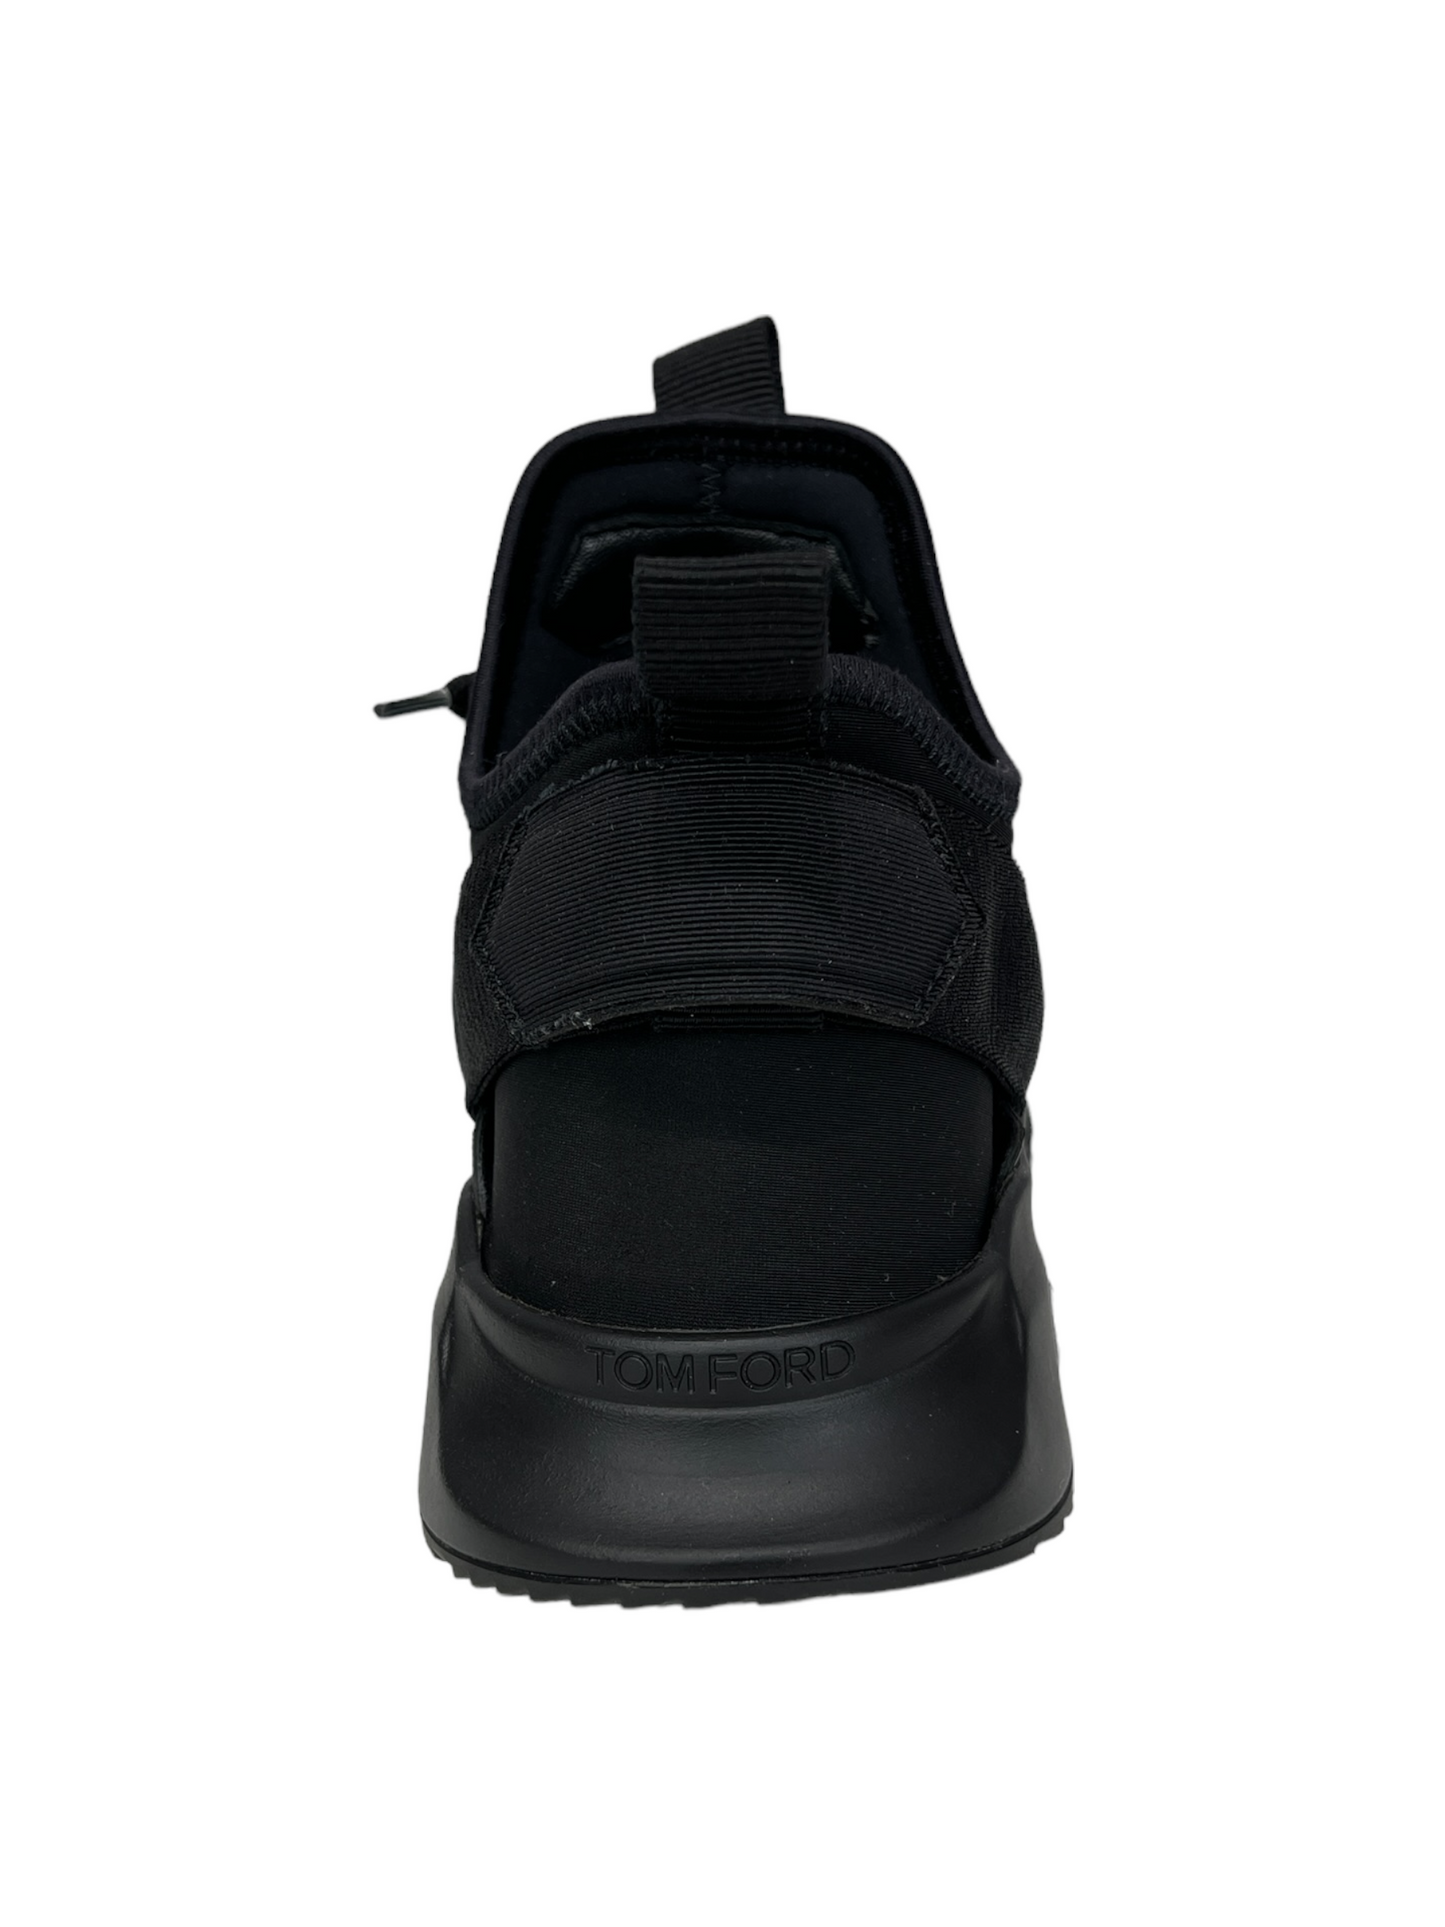 Tom Ford Black Leather Casual Sneakers - Genuine Design Luxury Consignment Calgary, Alberta, Canada New and Pre-Owned Clothing, Shoes, Accessories.